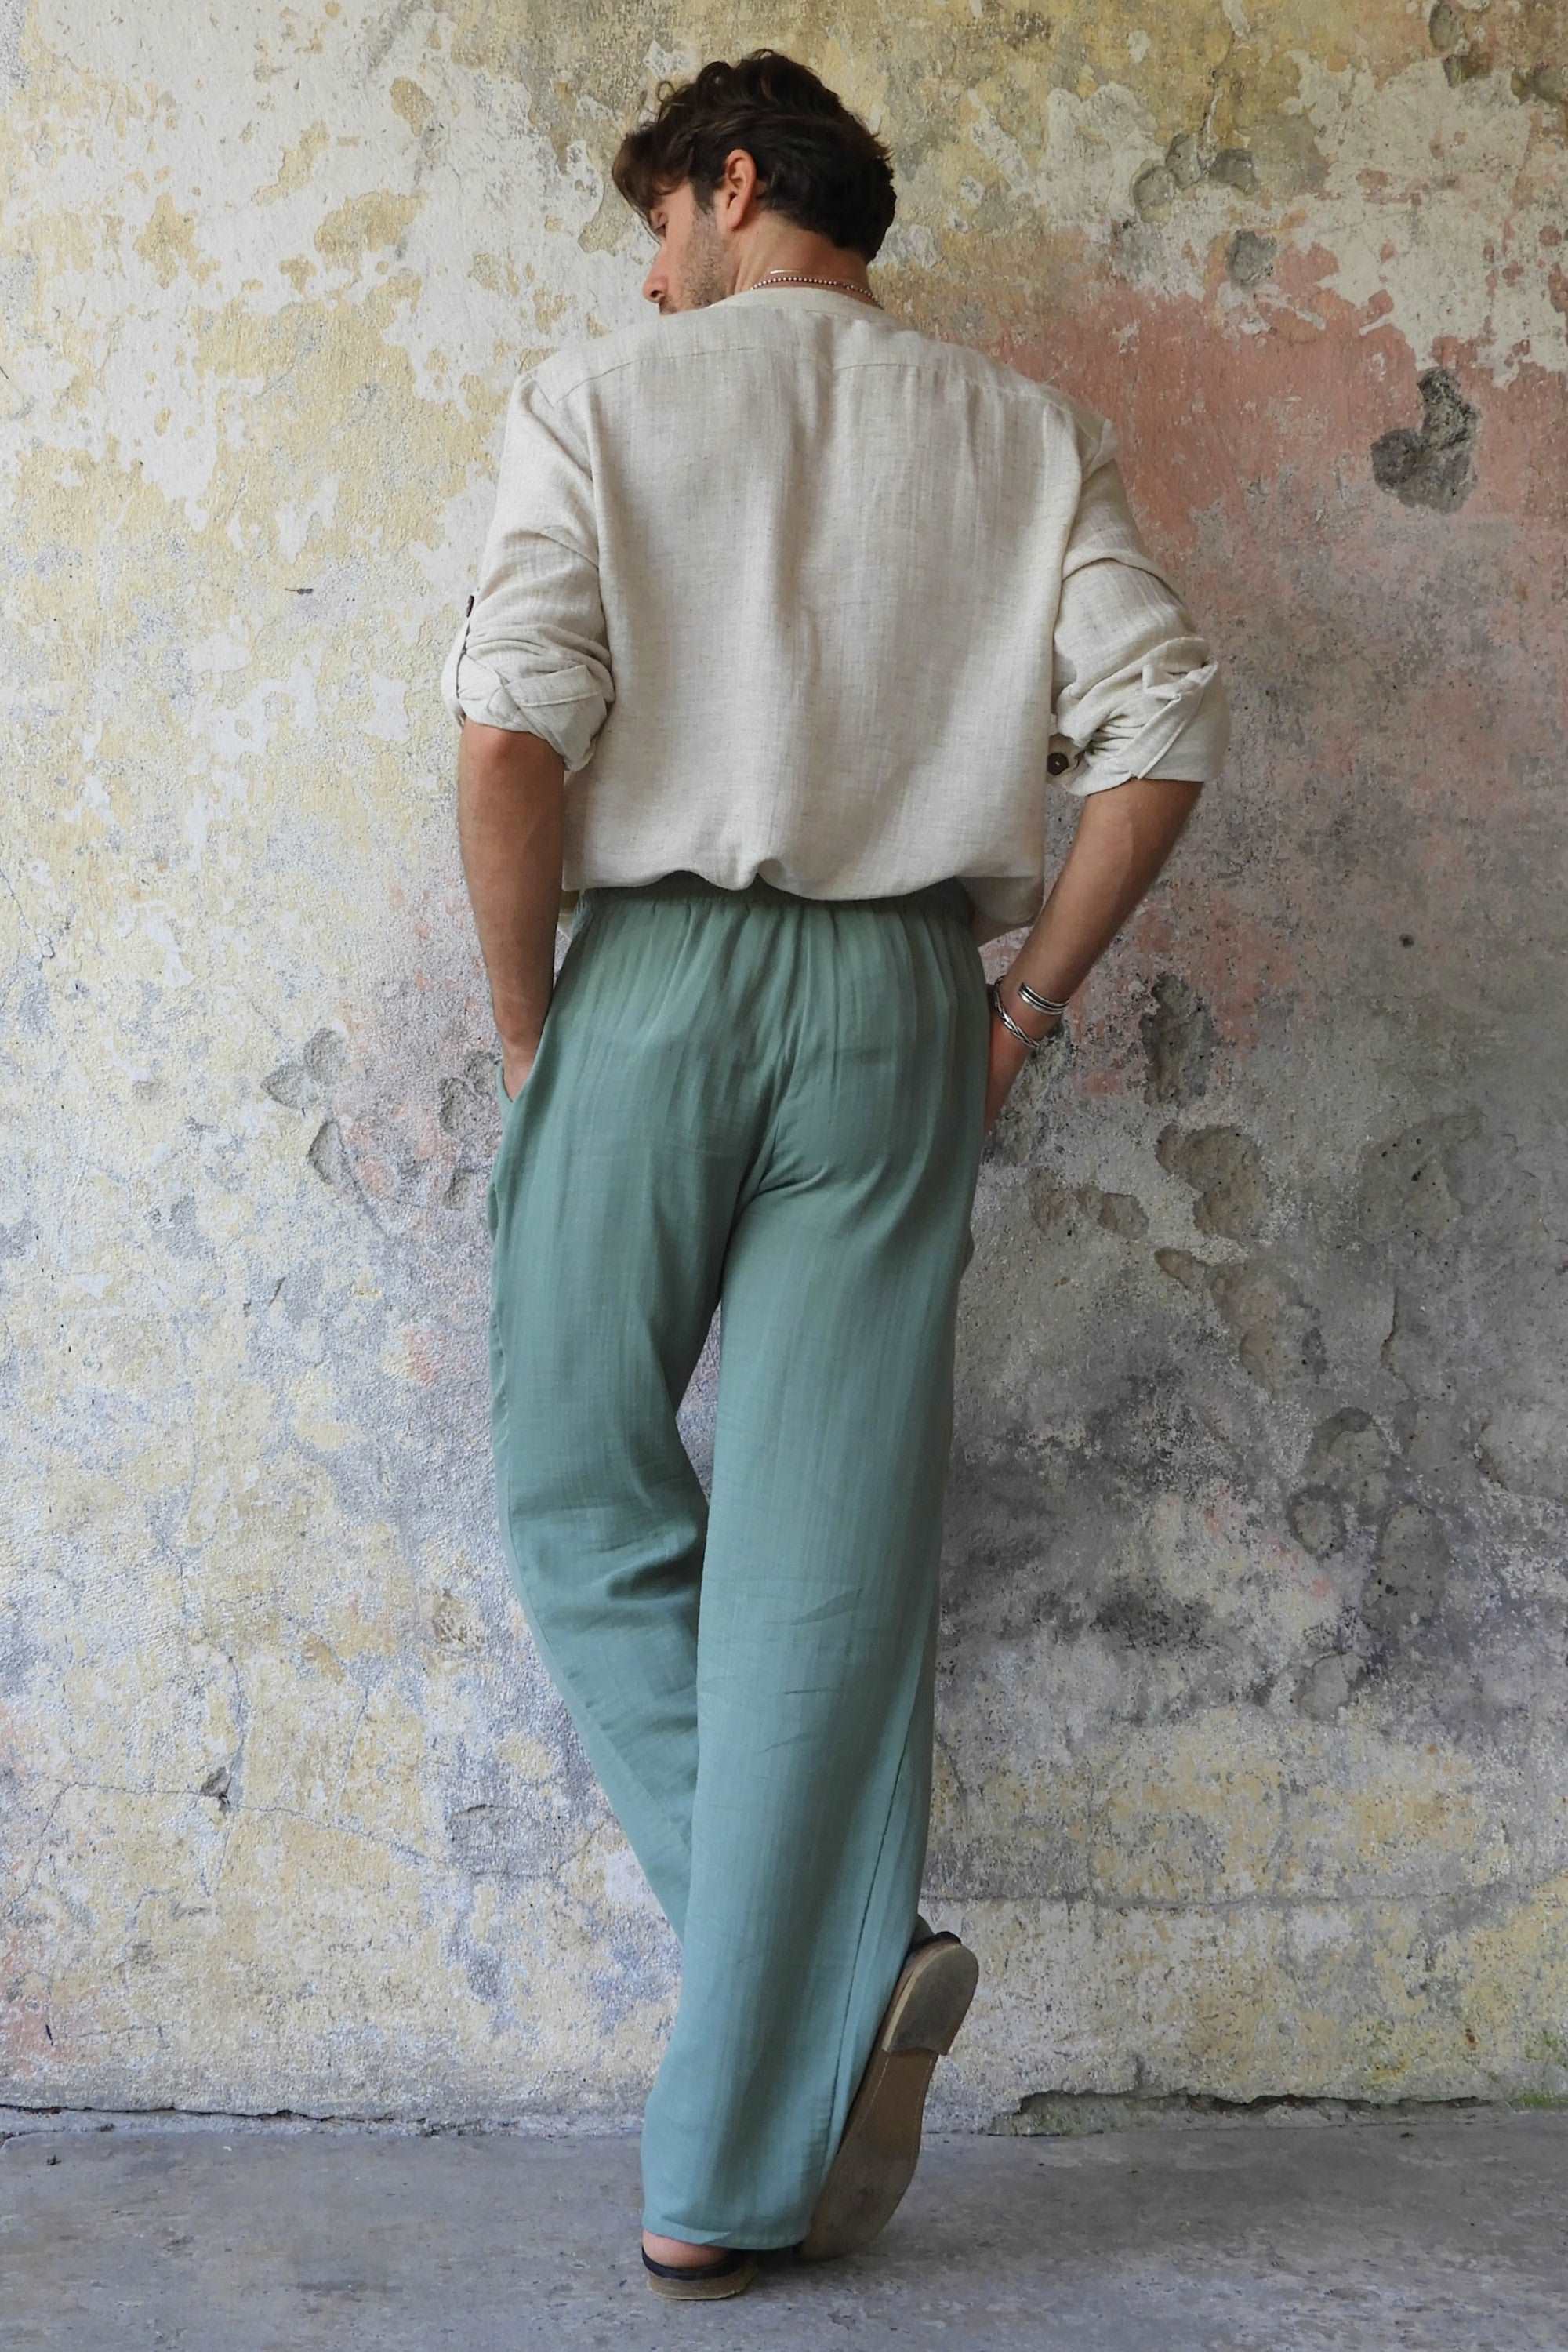 Sustainable  | DUNE Gender Neutral Gauze Cotton Pants (Black, Sage Green) by Odana's